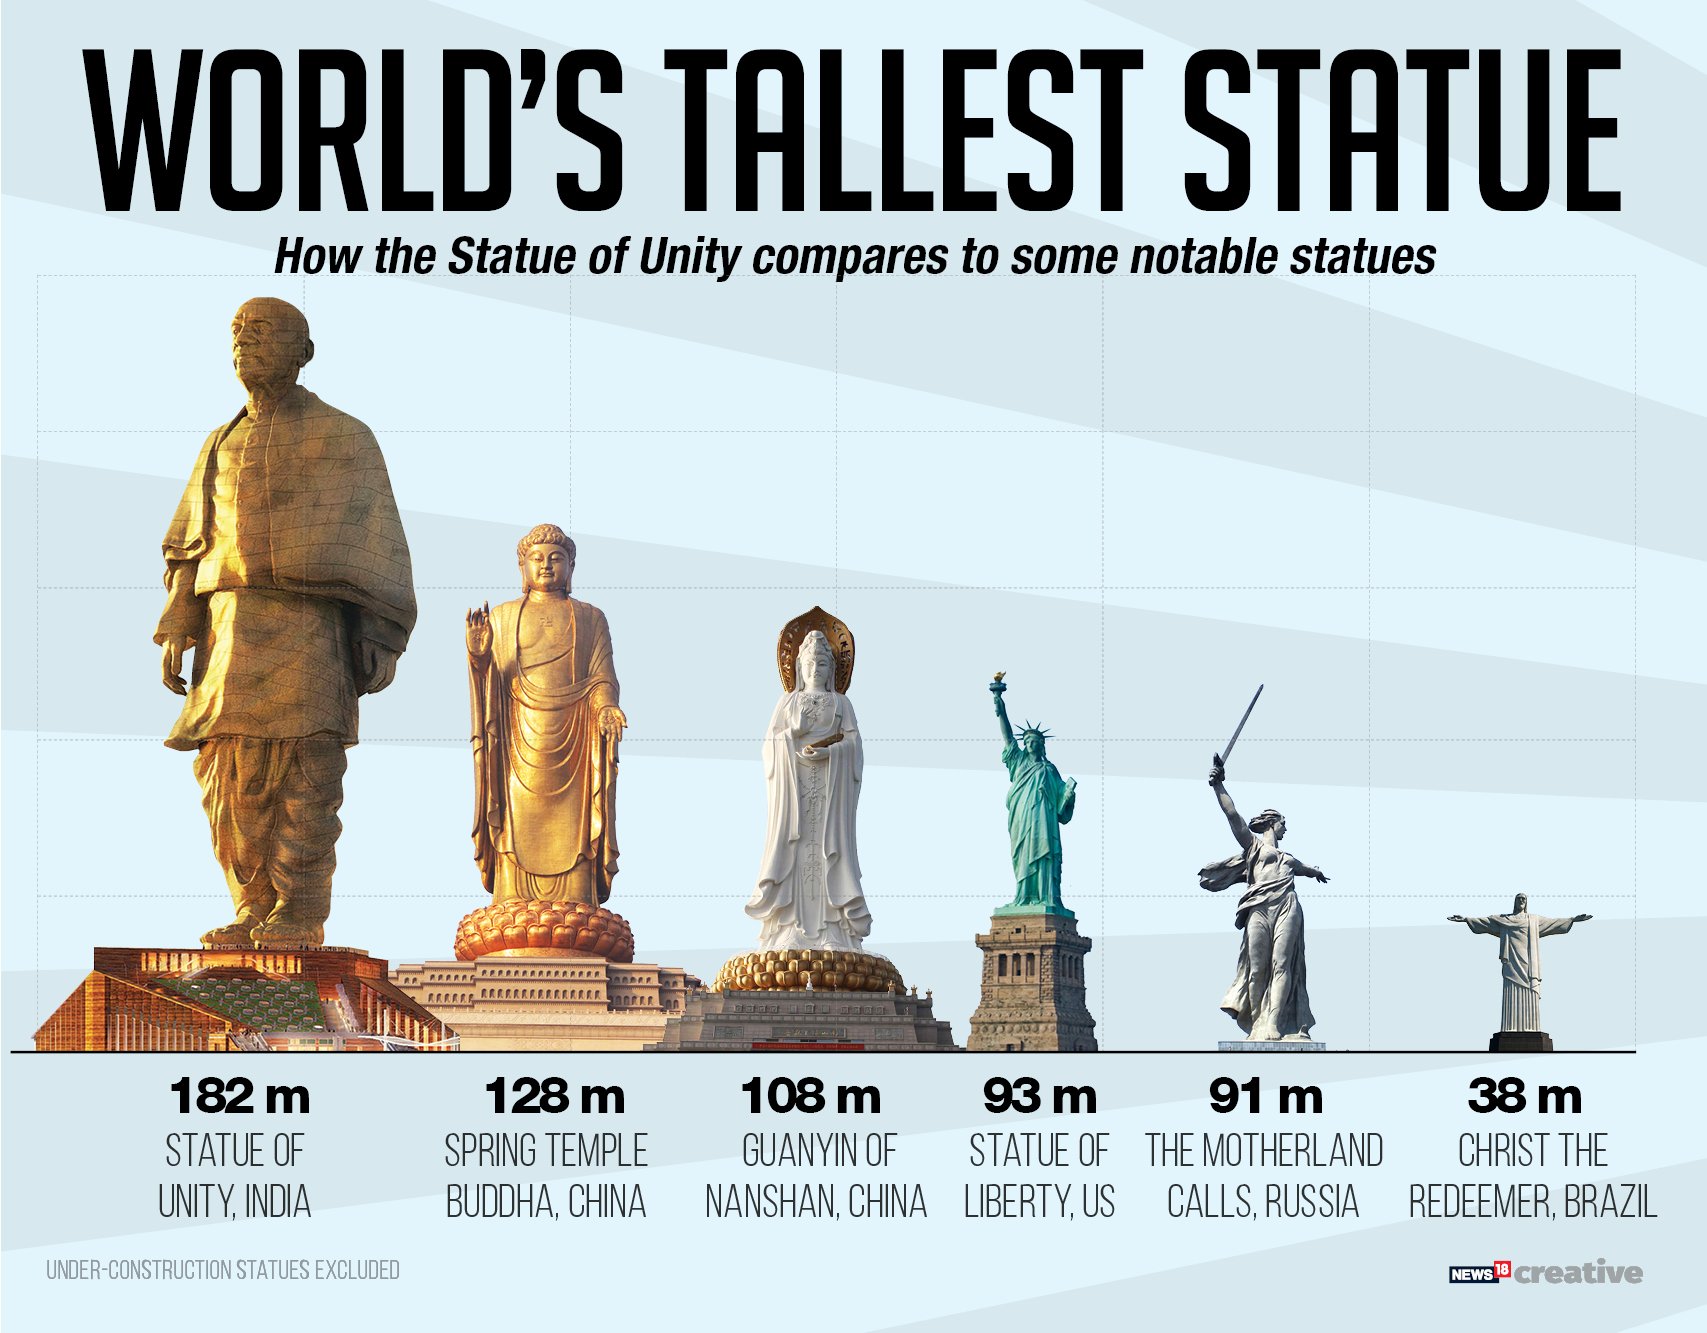 IN PICS: Statue of Unity, The World's Tallest Statue of Sardar Vallabhbhai  Patel - News18